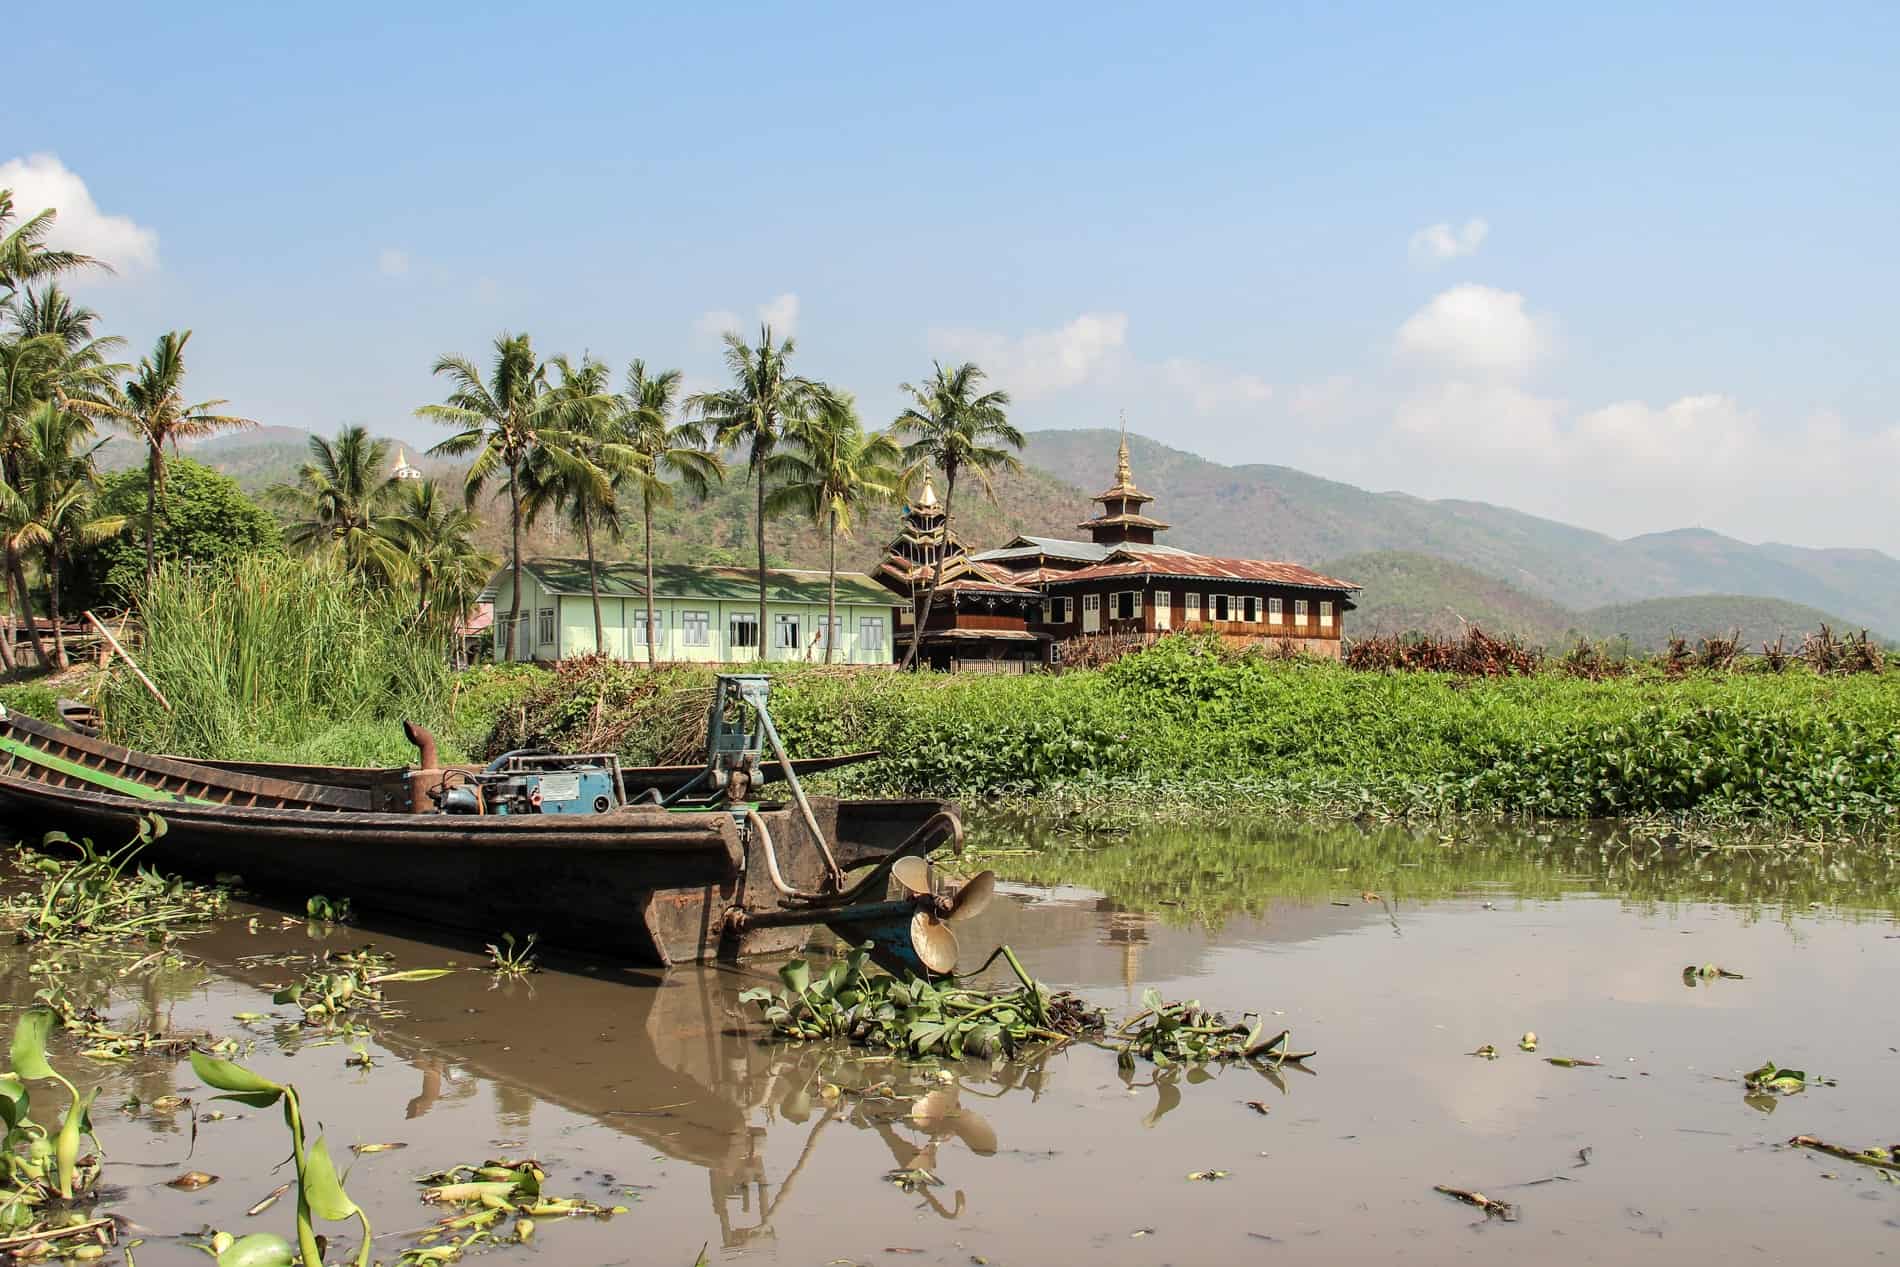 A motorised longboat parked at the green banks of a lush lakeside village with a mint green house and red and gold temple complex. 